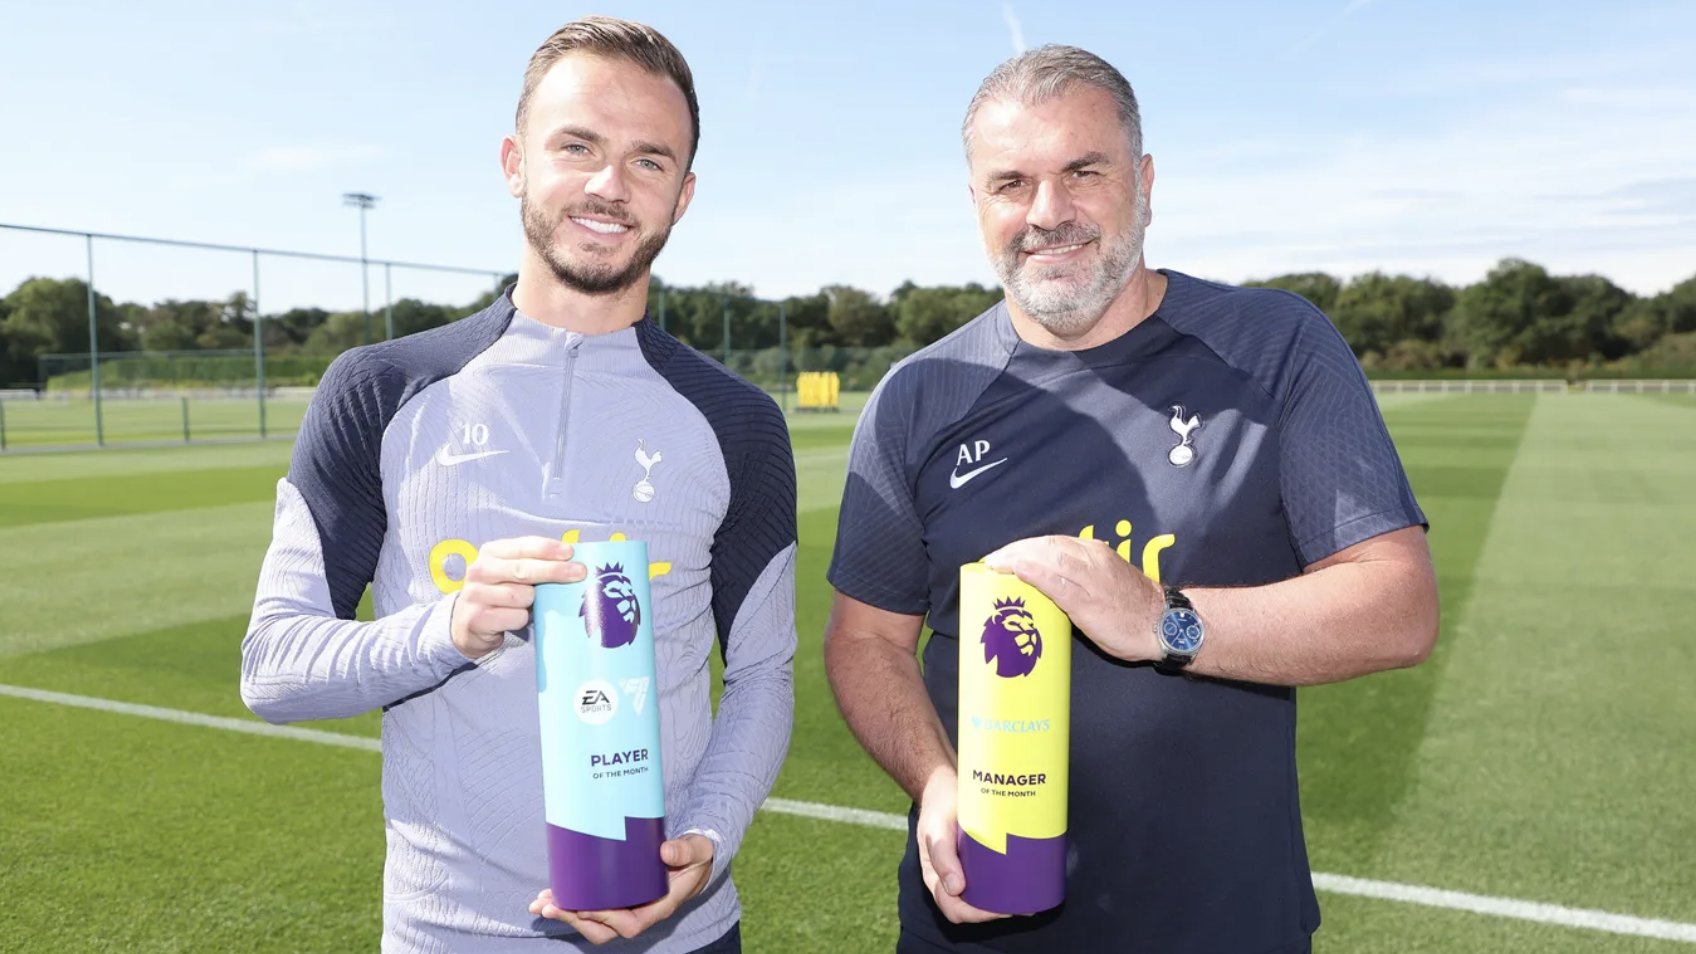 Ange Postecoglou wins Premier League Manager of the Month in his first  stint as Spurs boss